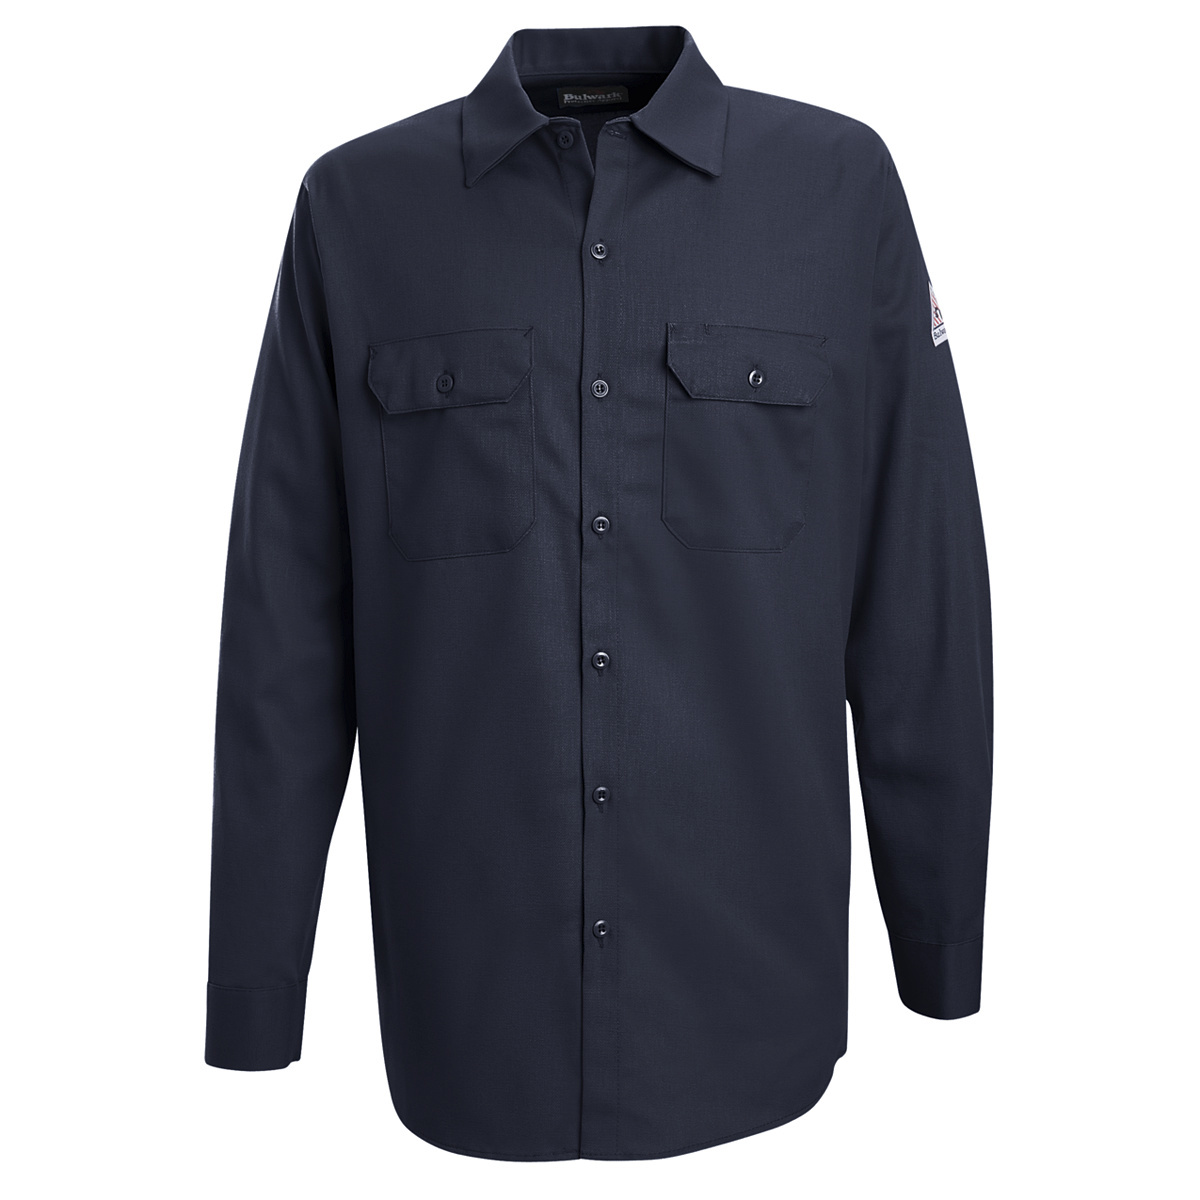 Bulwark® 3X Tall Navy Blue EXCEL FR® Cotton Flame Resistant Work Shirt With Button Front Closure